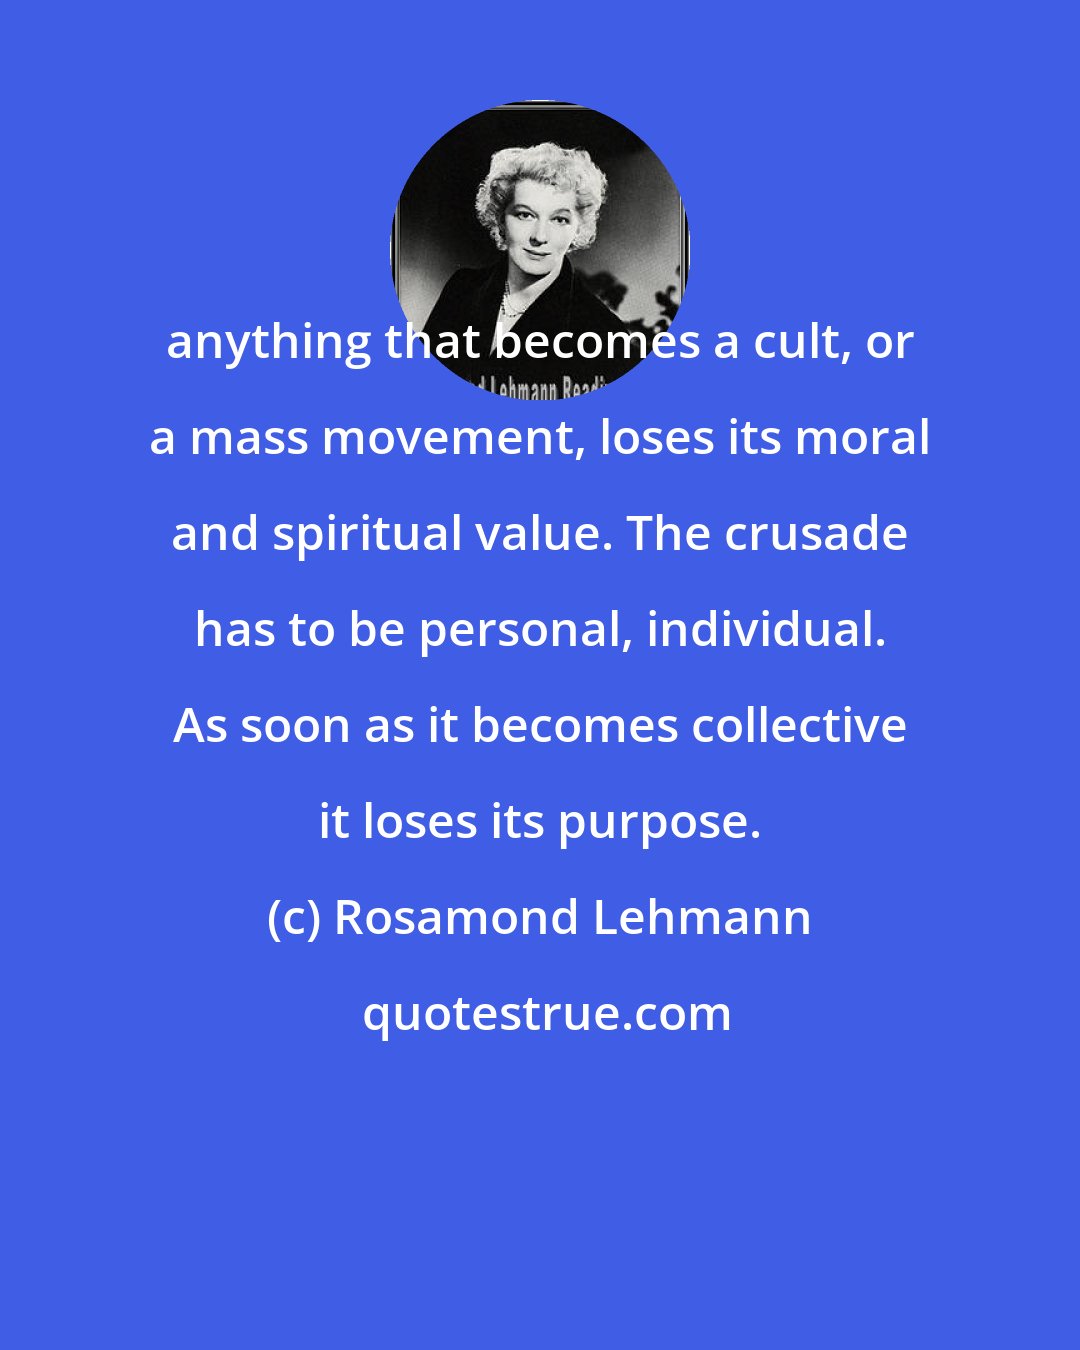 Rosamond Lehmann: anything that becomes a cult, or a mass movement, loses its moral and spiritual value. The crusade has to be personal, individual. As soon as it becomes collective it loses its purpose.